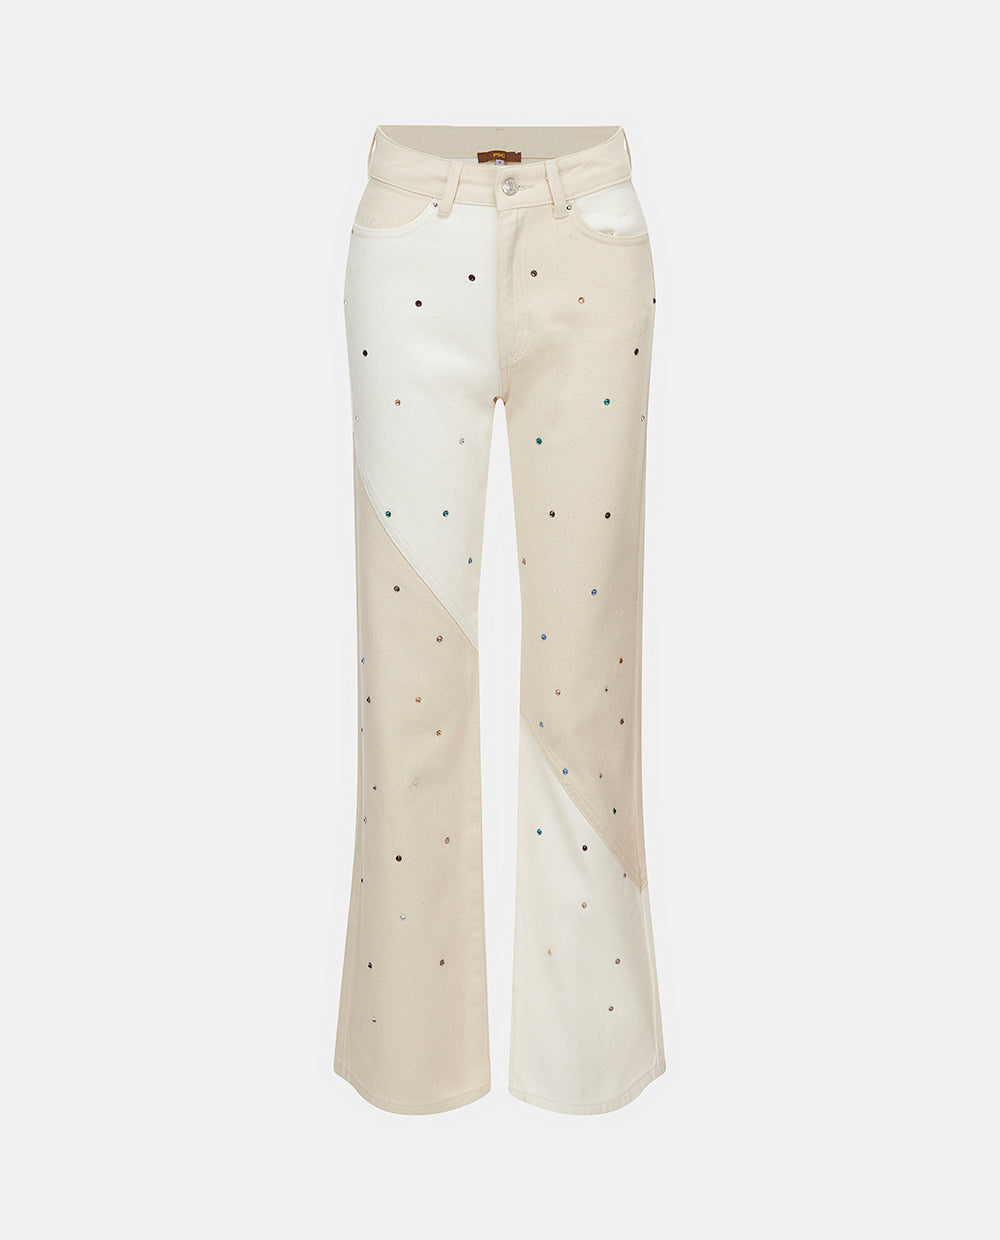 PATCHWORK WHITE JEANS